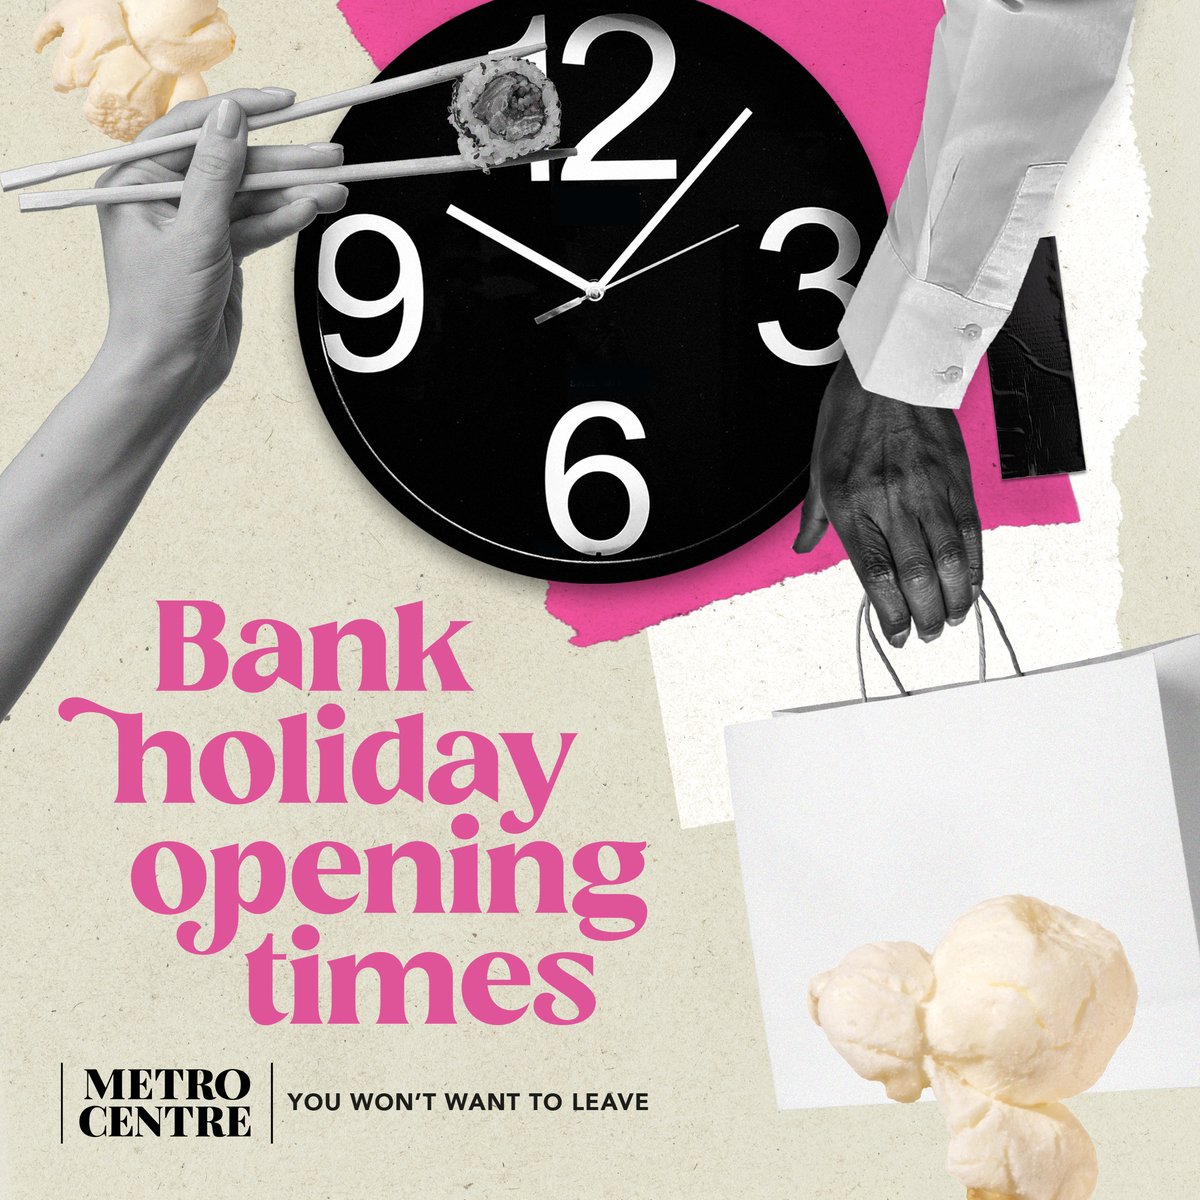 Visiting us this Bank Holiday weekend? ⏰ Our centre hours are: ⌚ 9am - 7pm Saturday ⌚ 11am - 5pm Sunday ⌚ 10am - 6pm Bank Holiday Monday (6th May) Our restaurants and leisure facilities are open even later! Please check with the individual retailers before you set off.